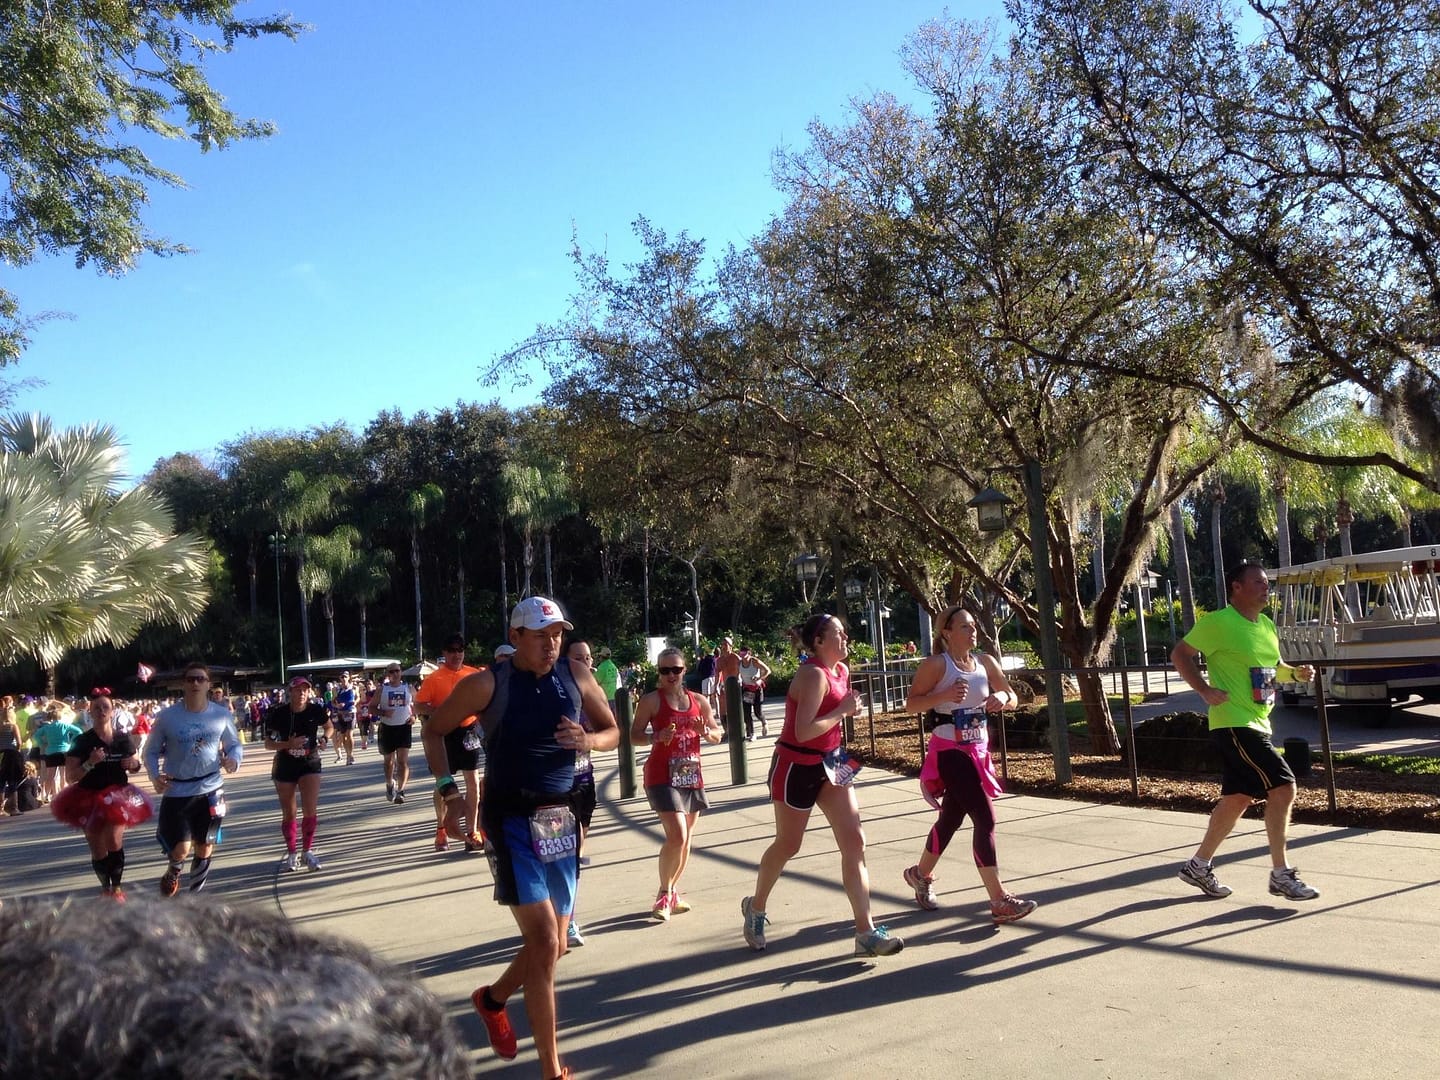 runners line the streets of Disney's Animal Kingdom under a bright blue sky